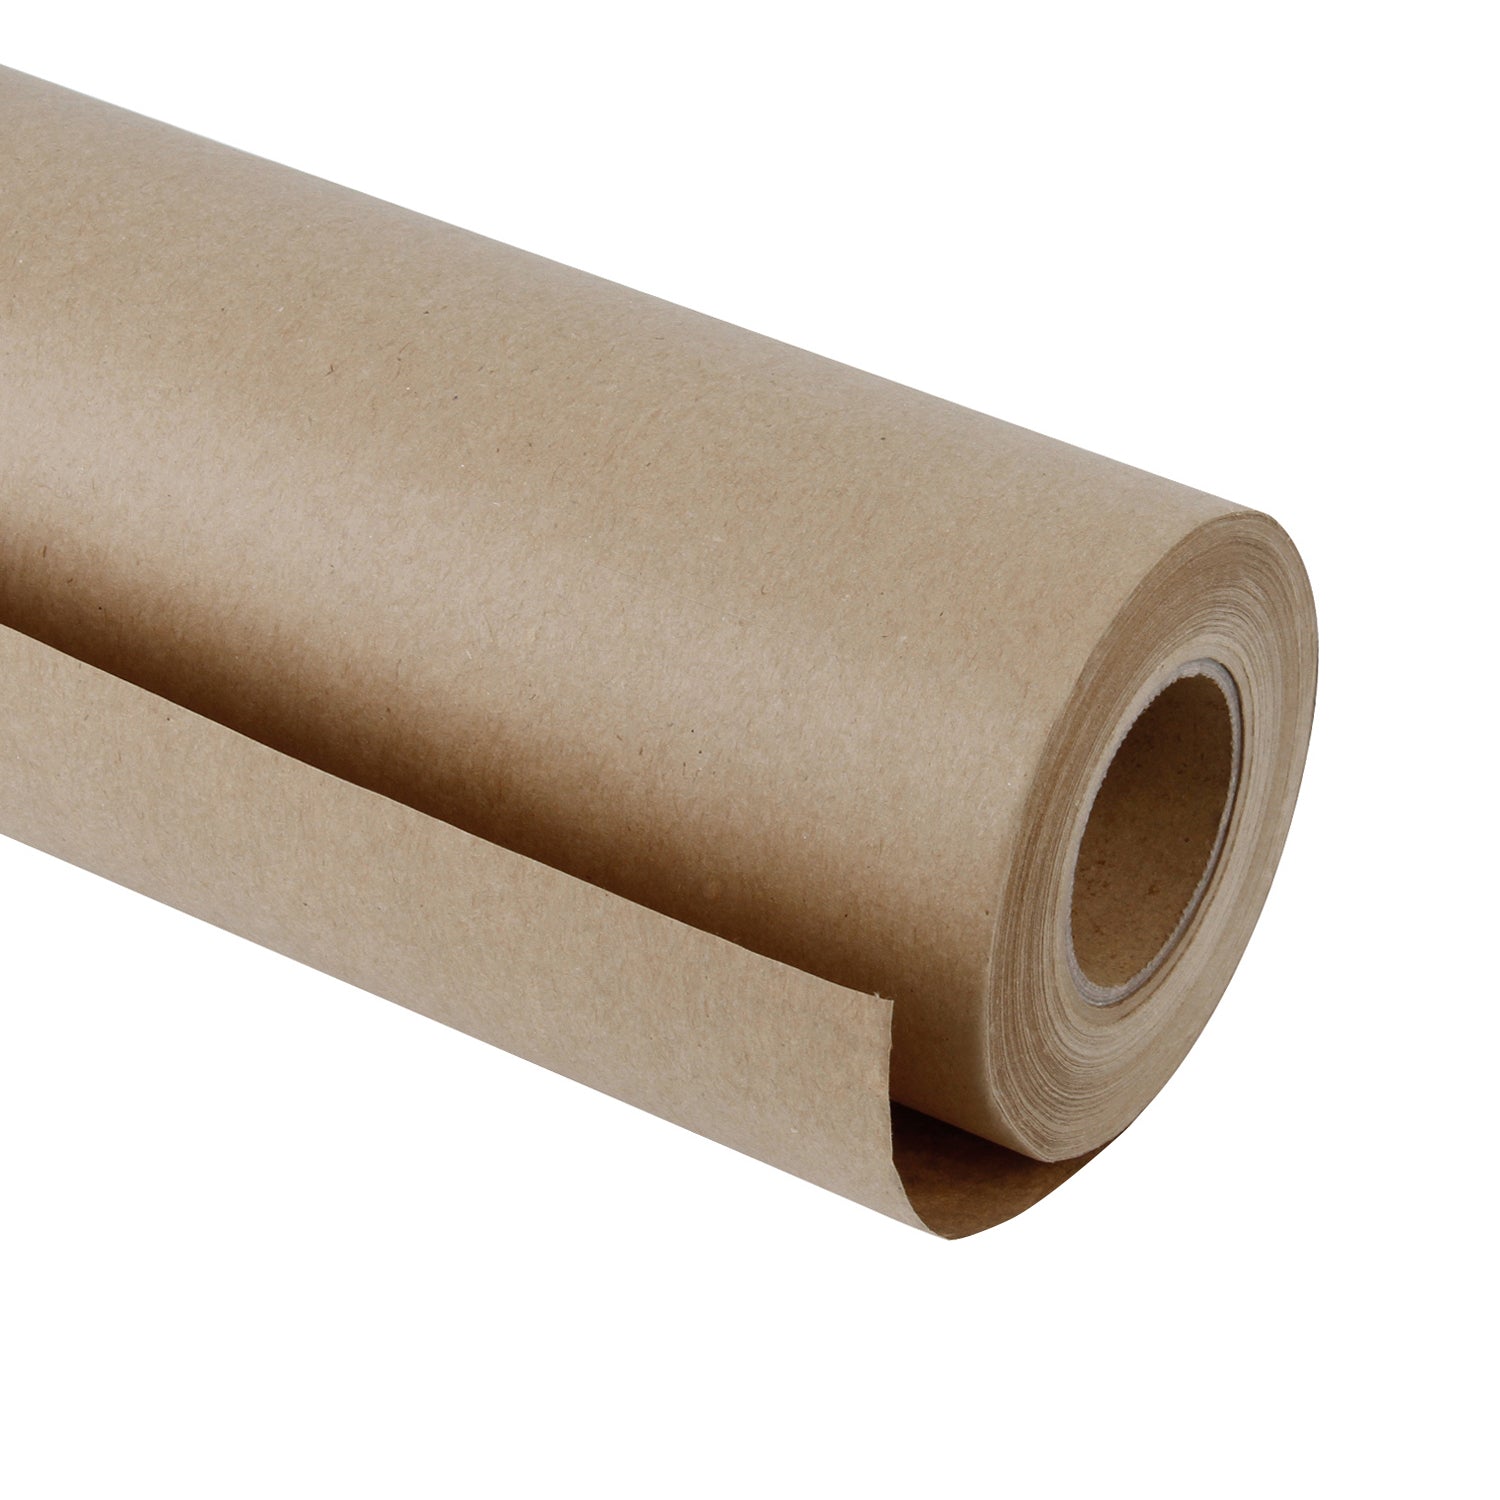 Brown Kraft Paper Roll 17.5 in x 1320 in (110 ft) Made in The USA - Brown  Paper Roll - Brown Wrapping Paper Roll - Brown Craft Paper Roll - Roll of